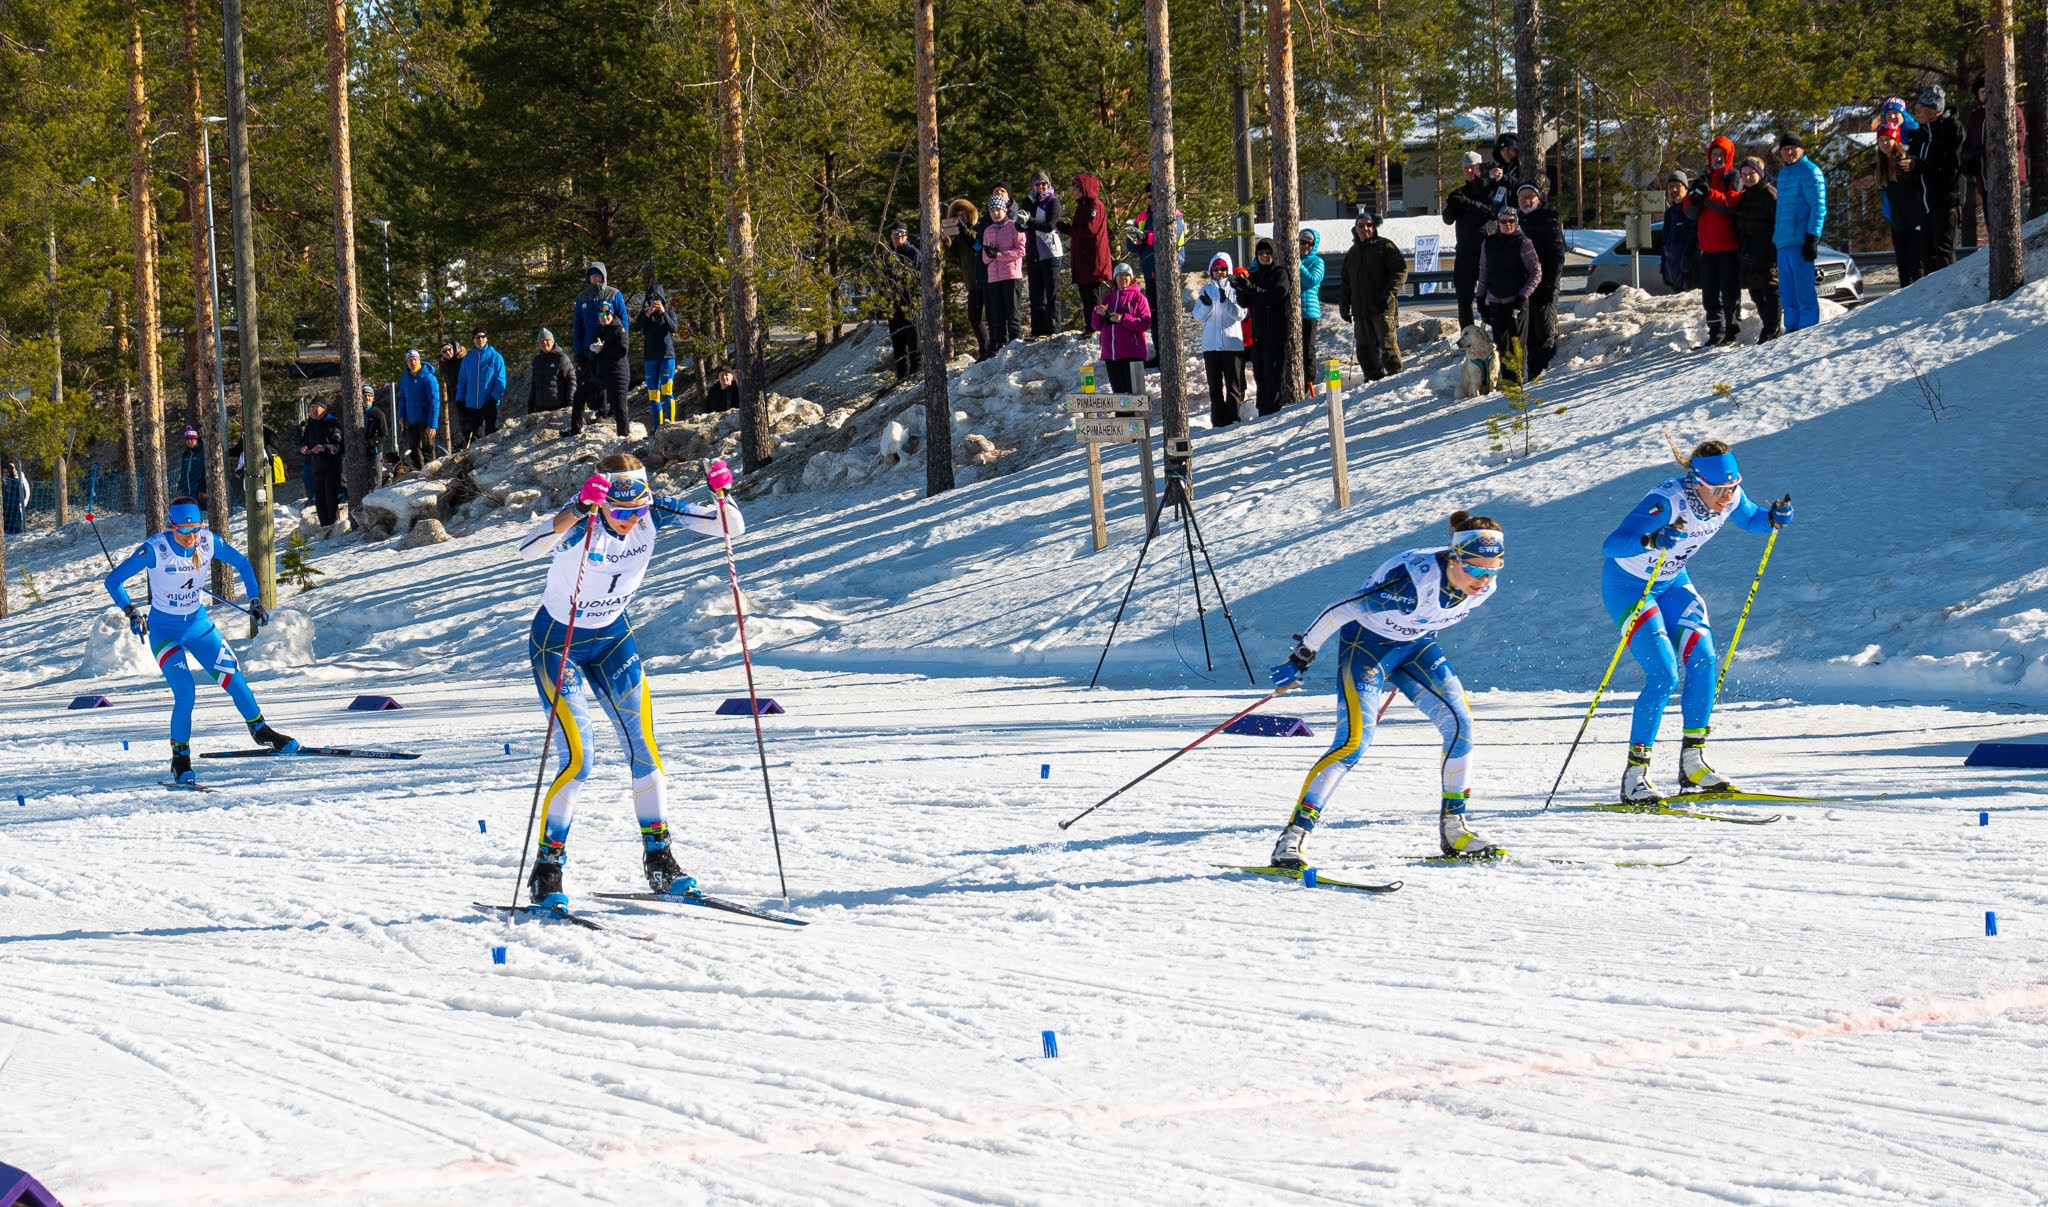 Sweden's Tove Ericsson, second right, clinched victory in the girls' cross-country skiing sprint ©Justus Pietikäinen/EYOF Vuokatti 2022 